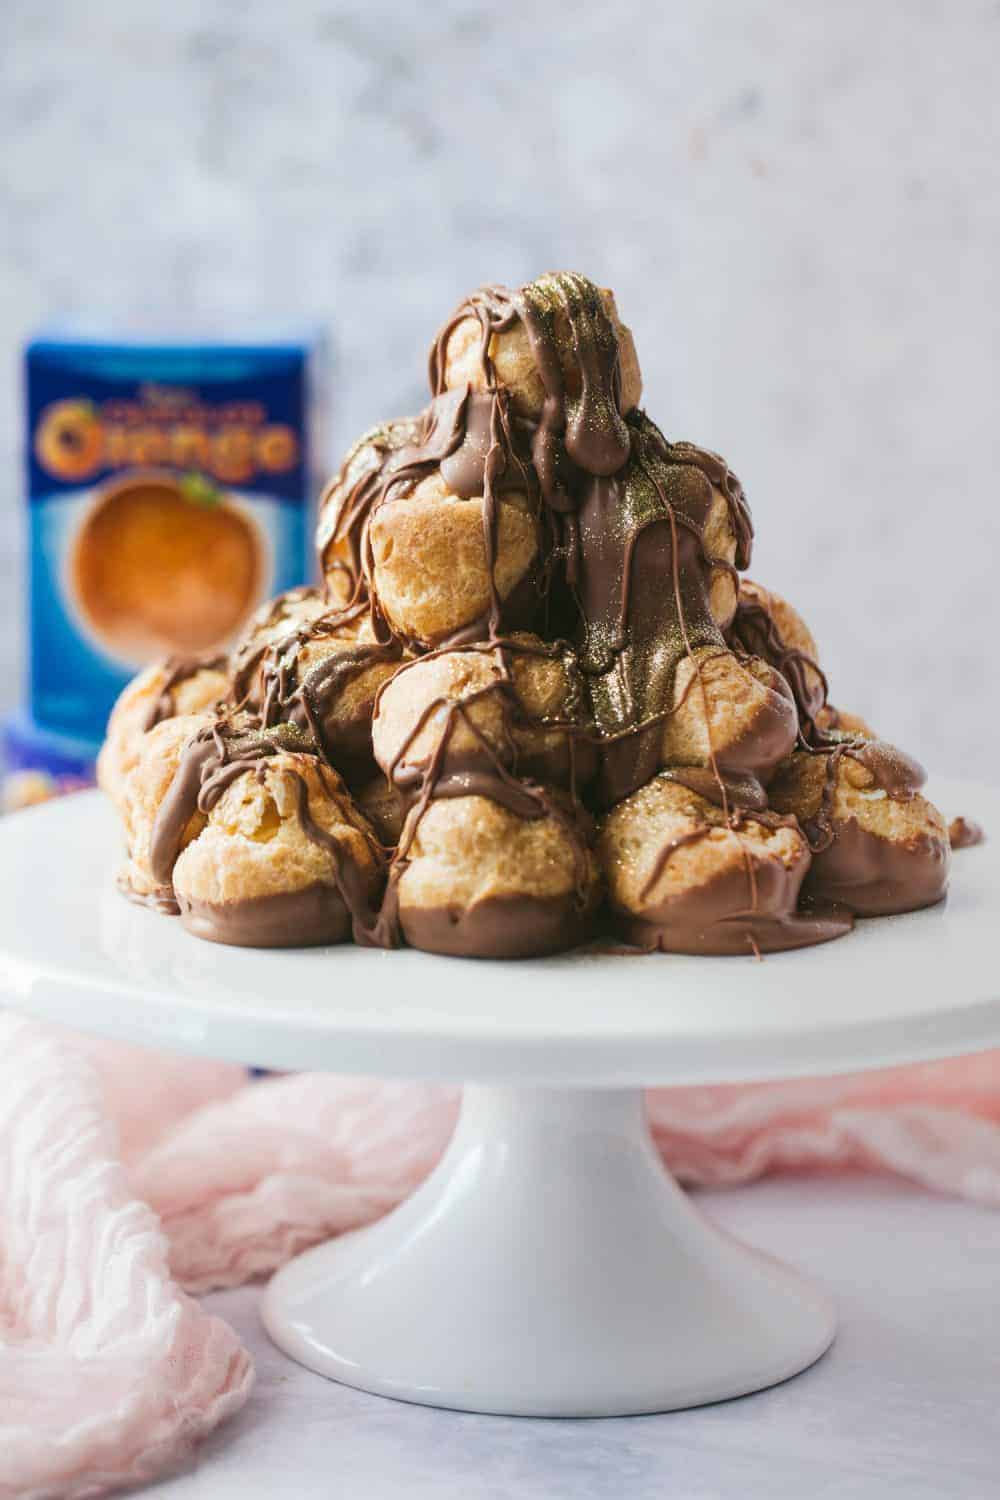 A profiterole tower covered in chocolate sauce.